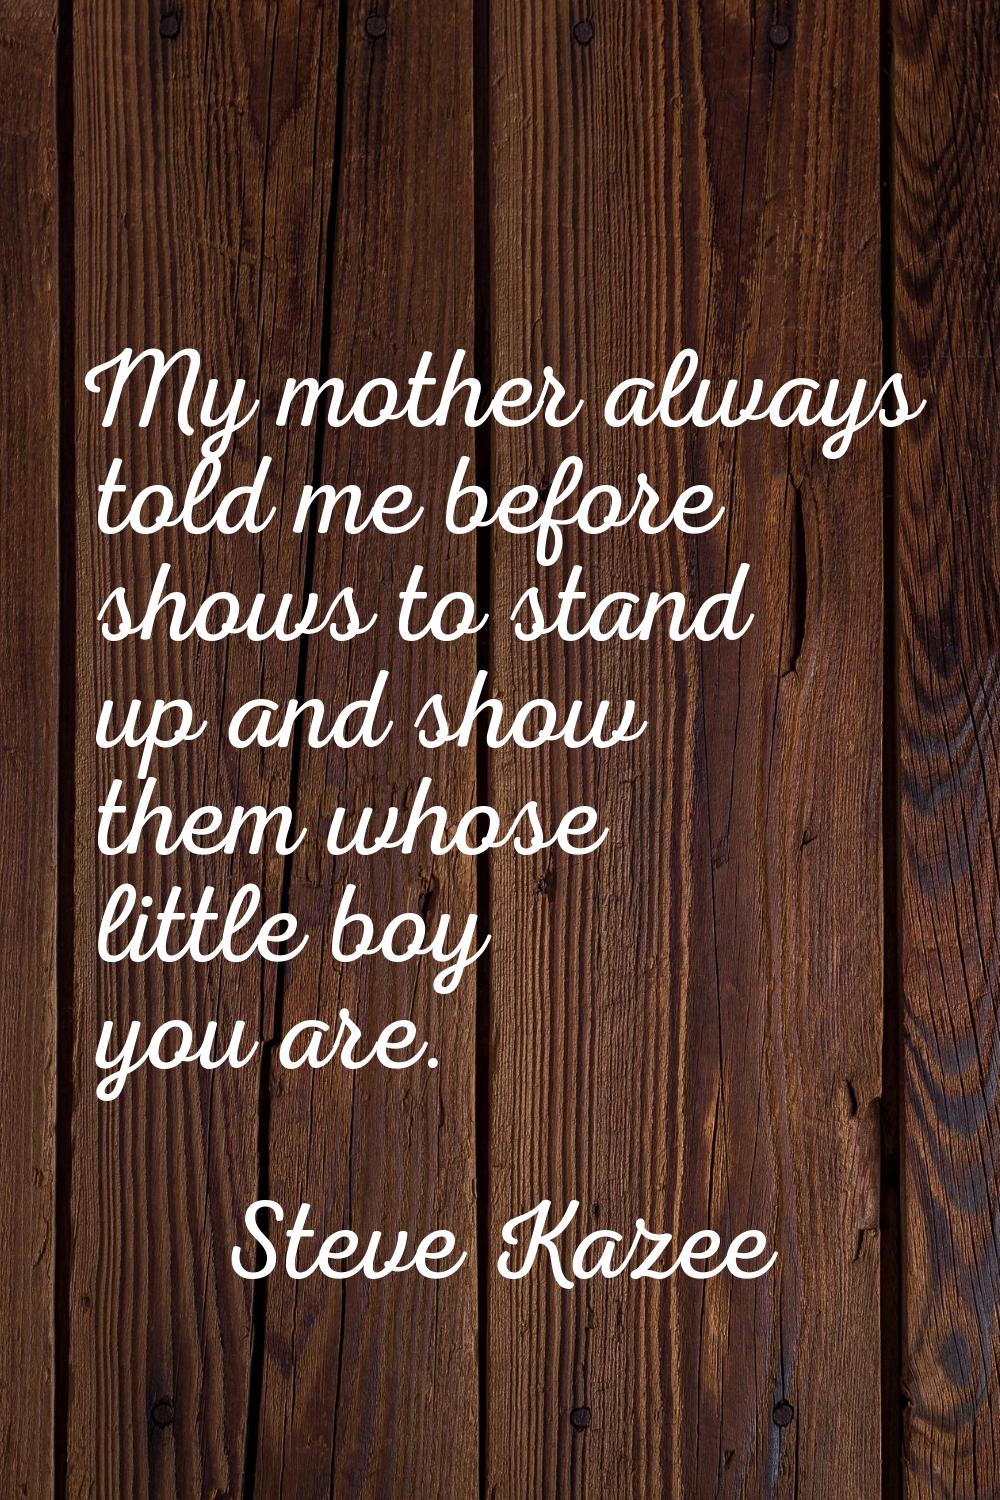 My mother always told me before shows to stand up and show them whose little boy you are.